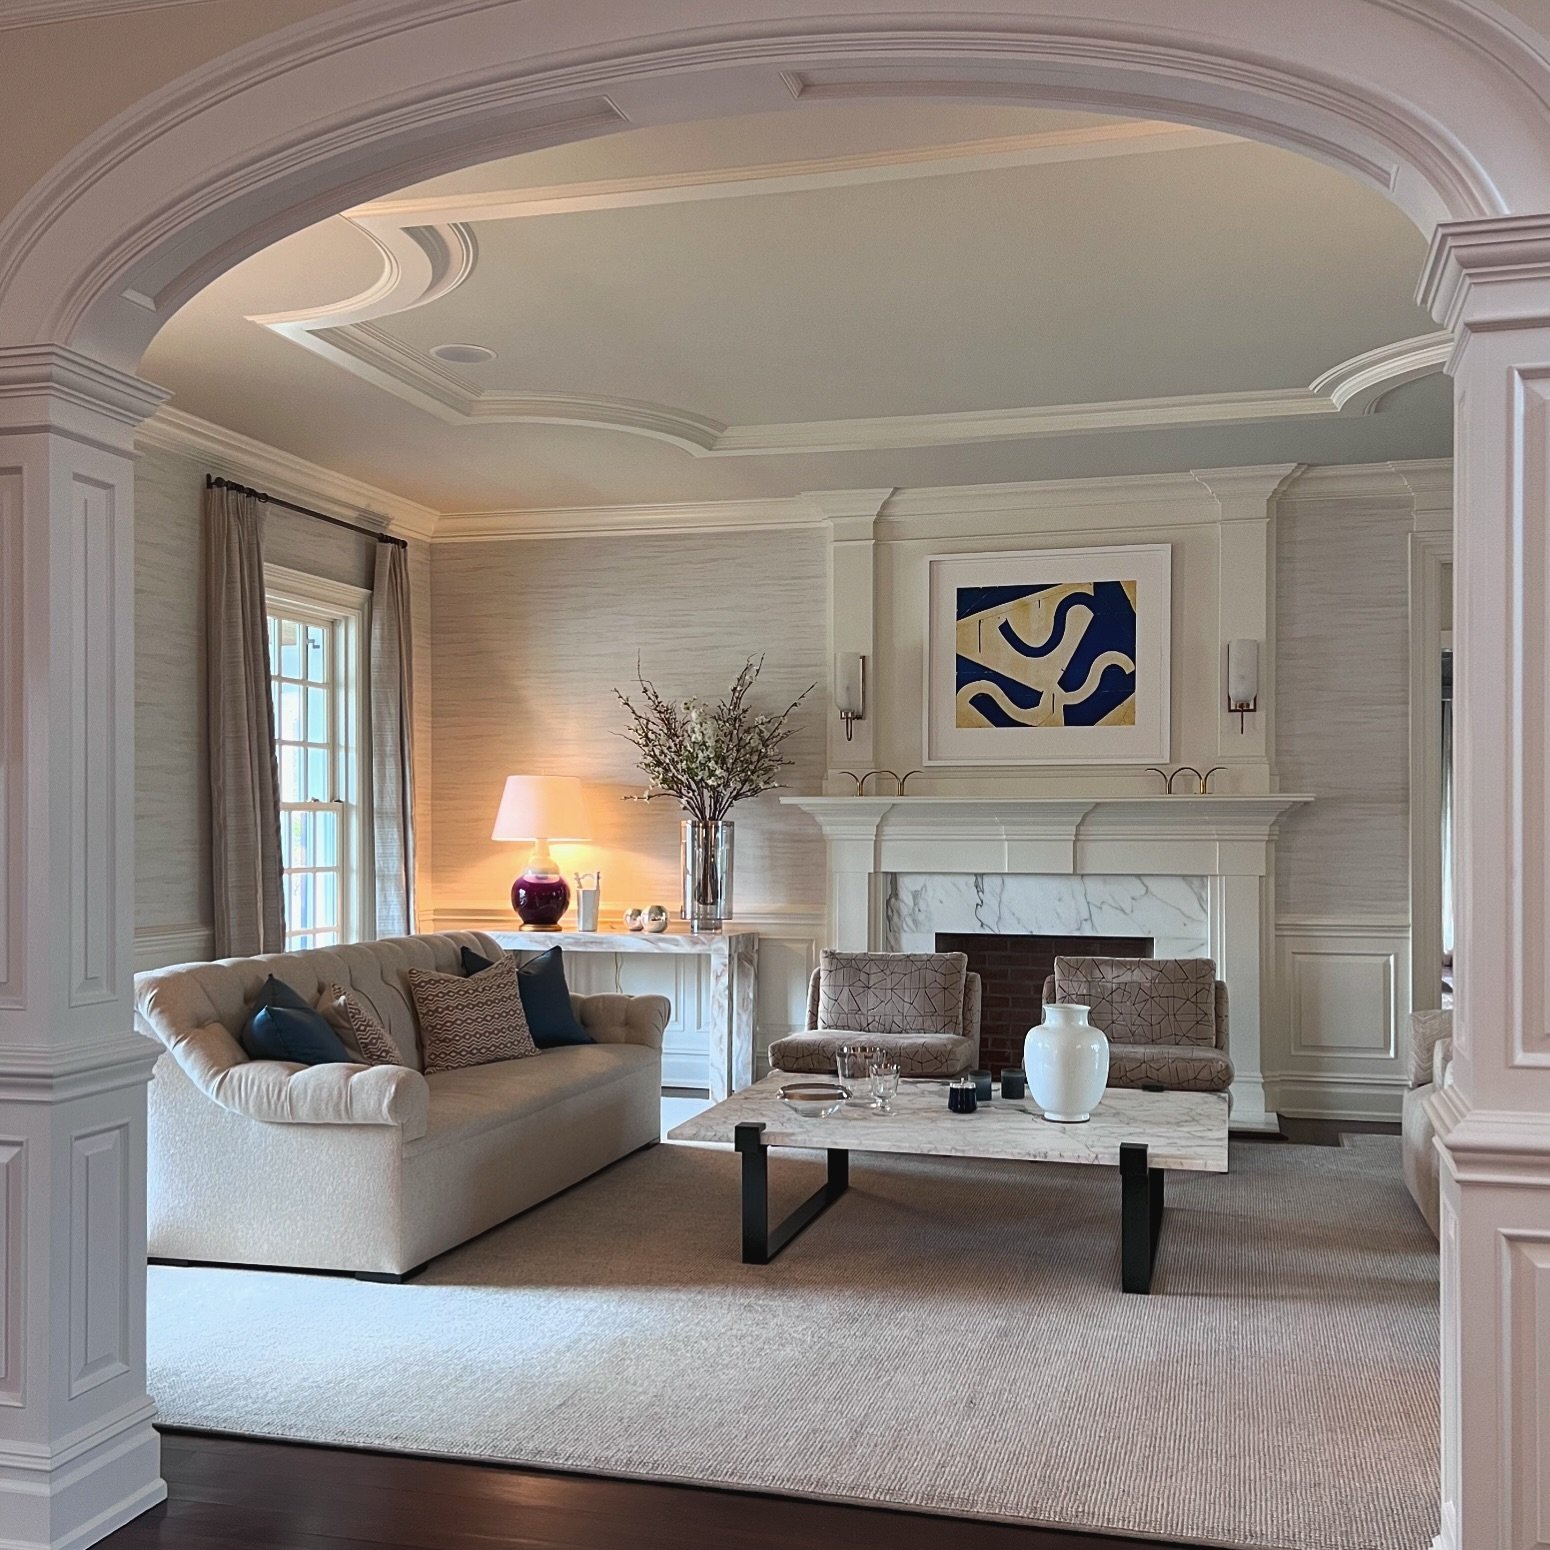 More beautiful things coming for this gorgeous home &mdash; traditional architecture, but balancing it out with modern pieces, and of course just the right classic antiques.
#hilderbrandinteriors #classicinterior #newcanaanct